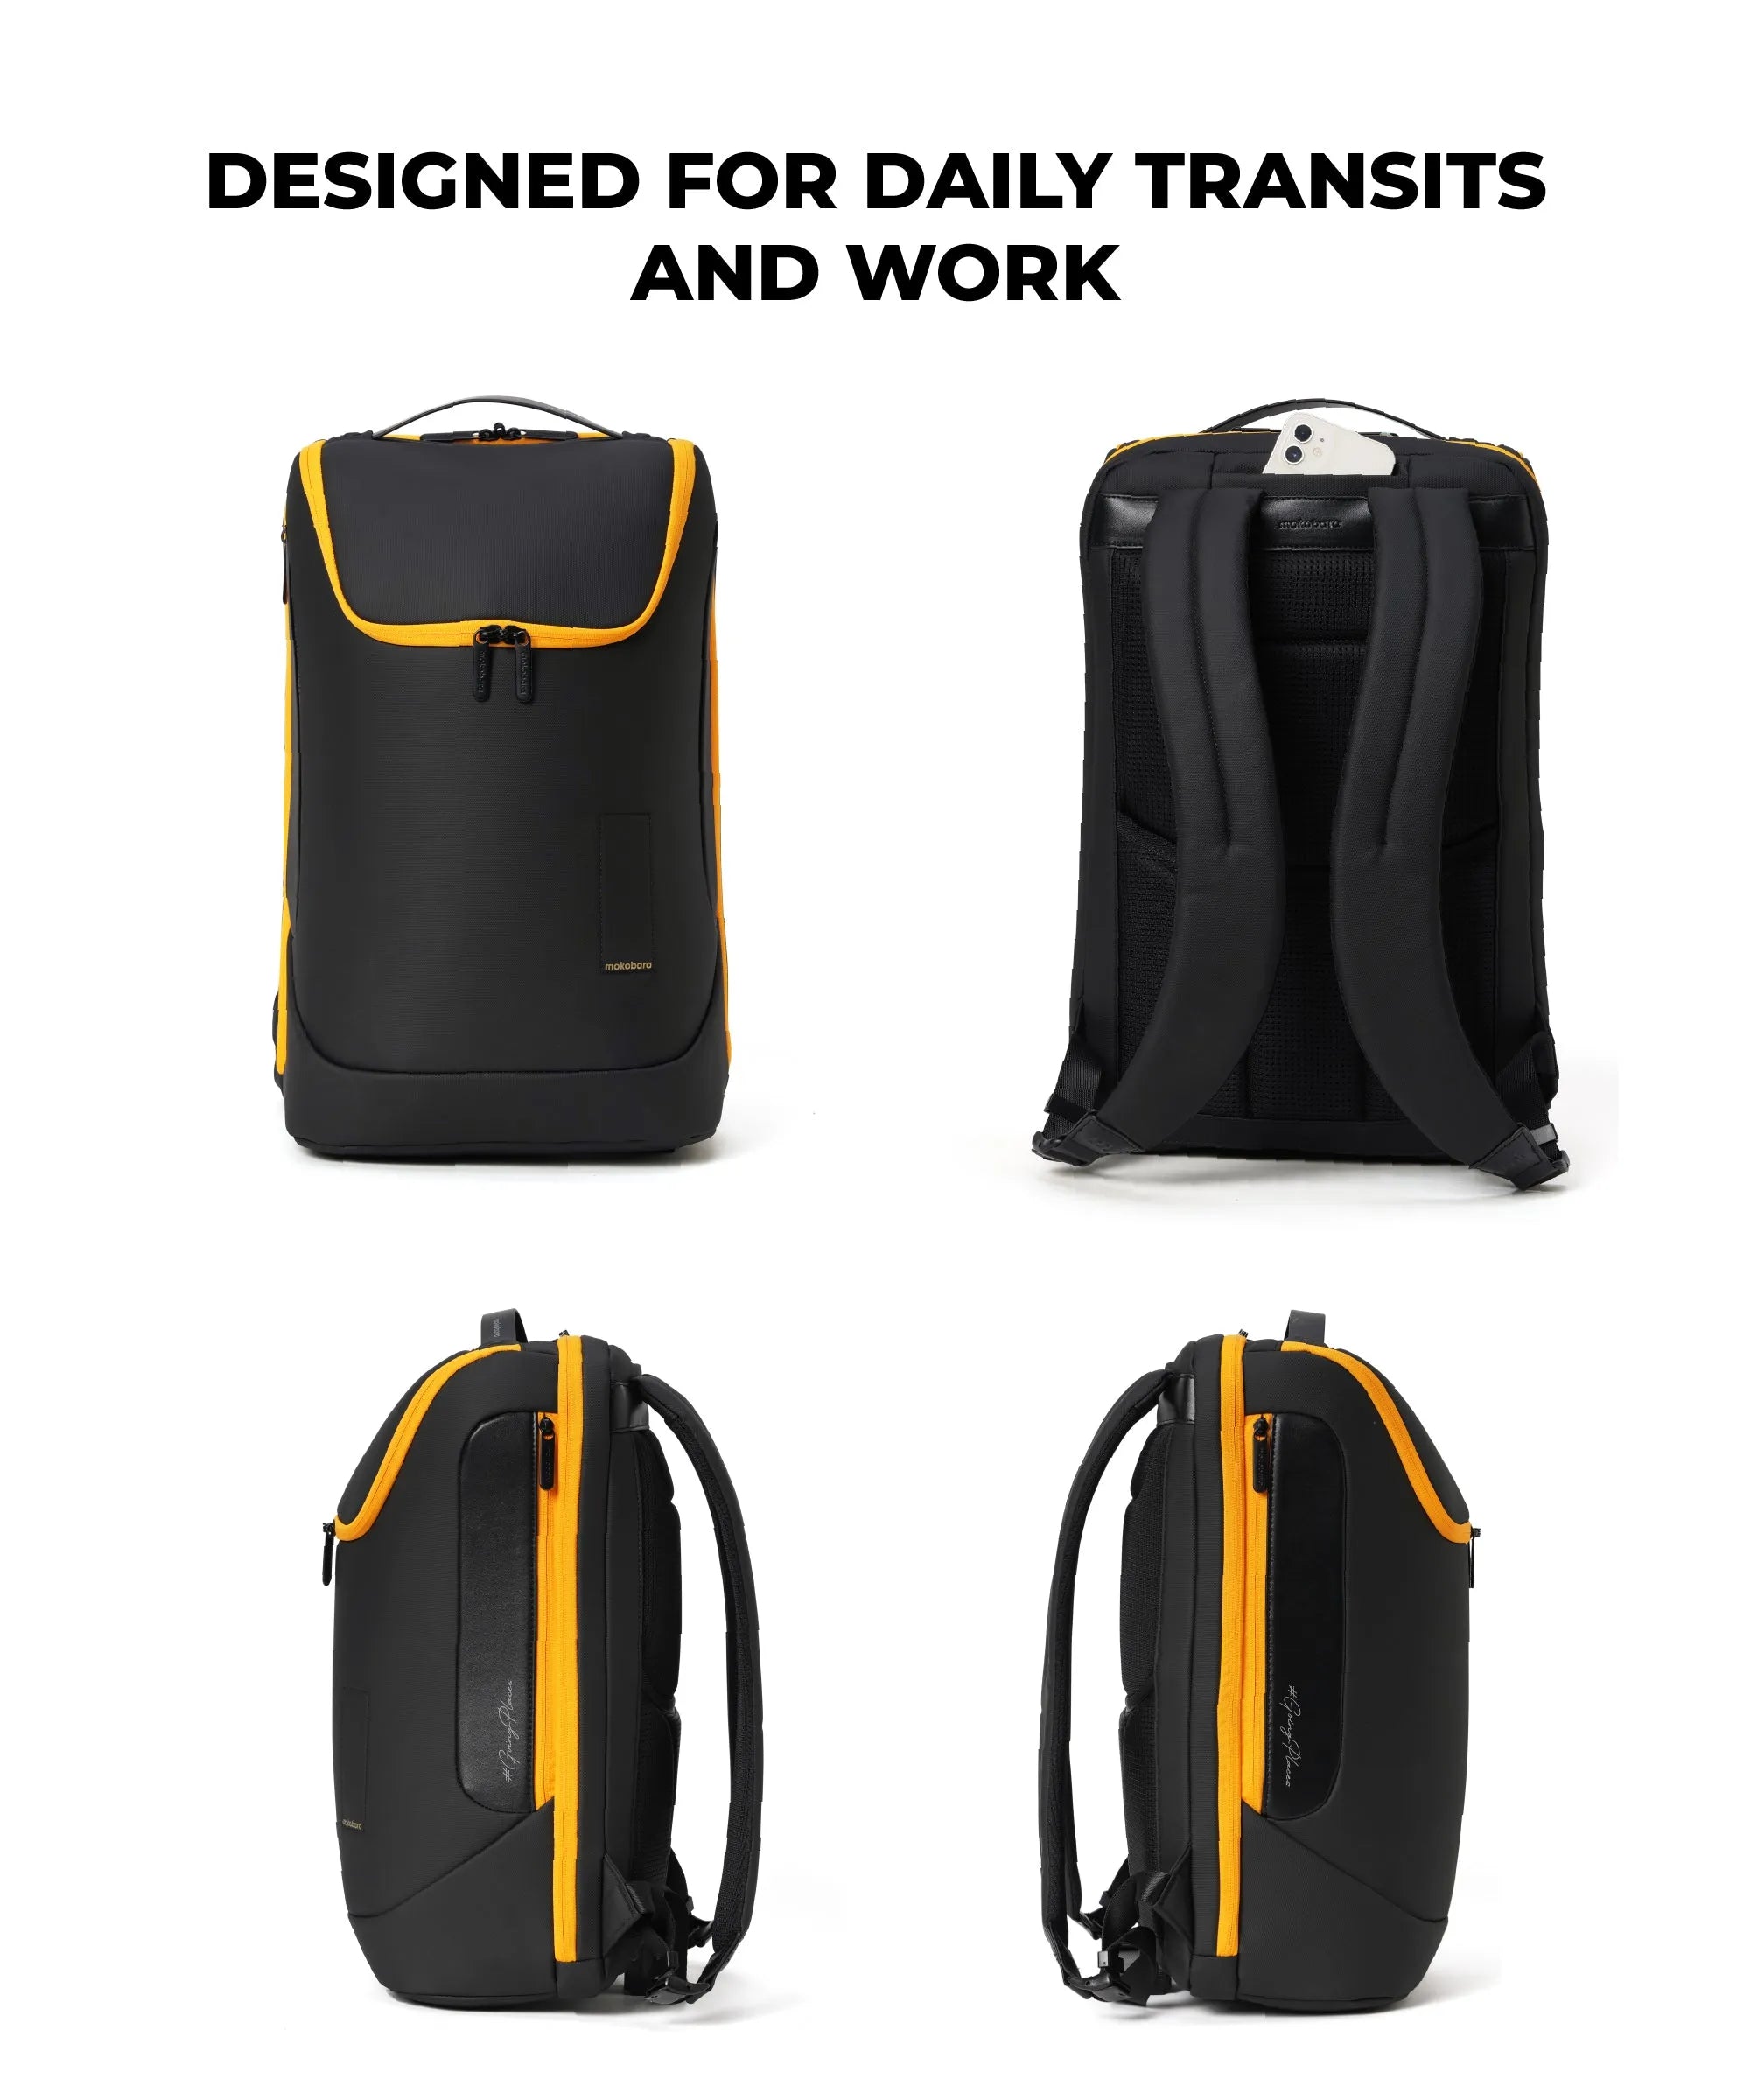 Color_Crypto Sunray (Limited Edition) - 2.0 | The Transit Backpack - 30L